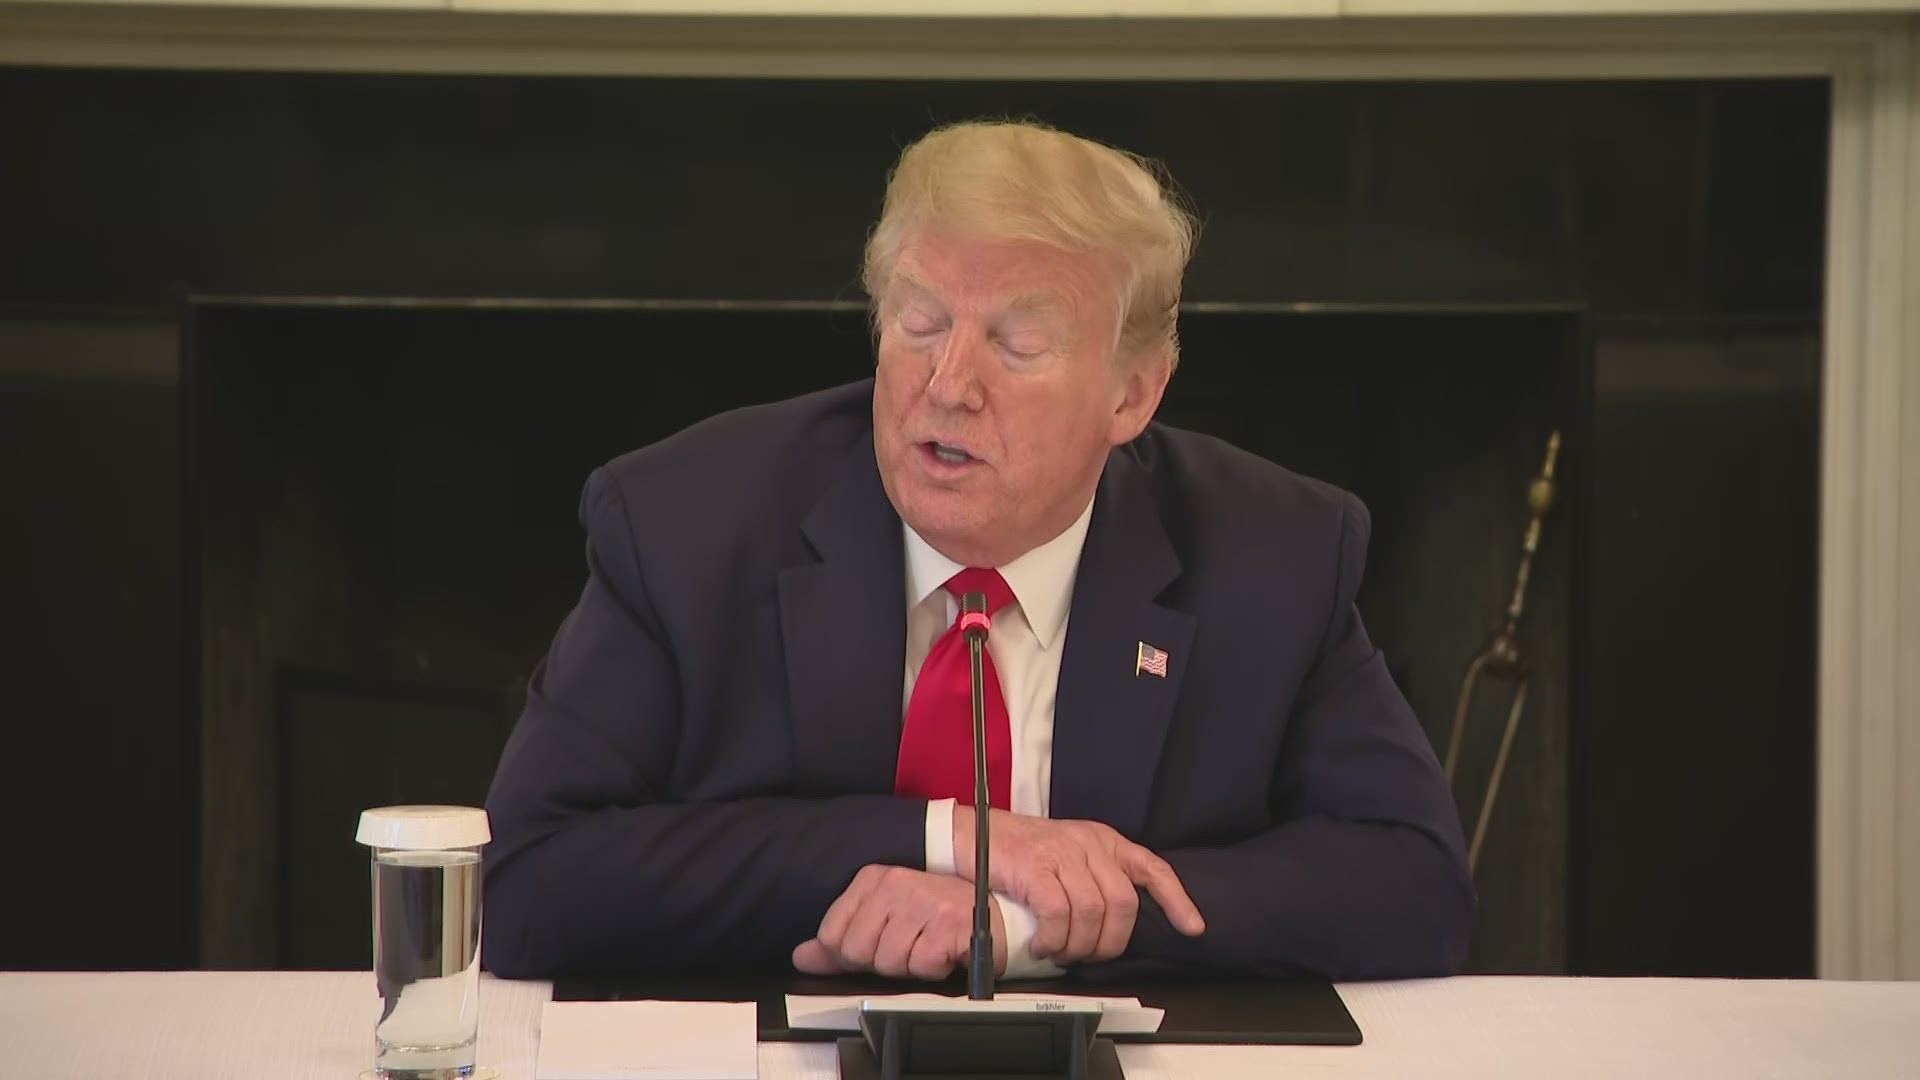 President Trump says he doesn't want people to 'get used to this' when speaking about business closures as well as federal aid to states with sanctuary cities.